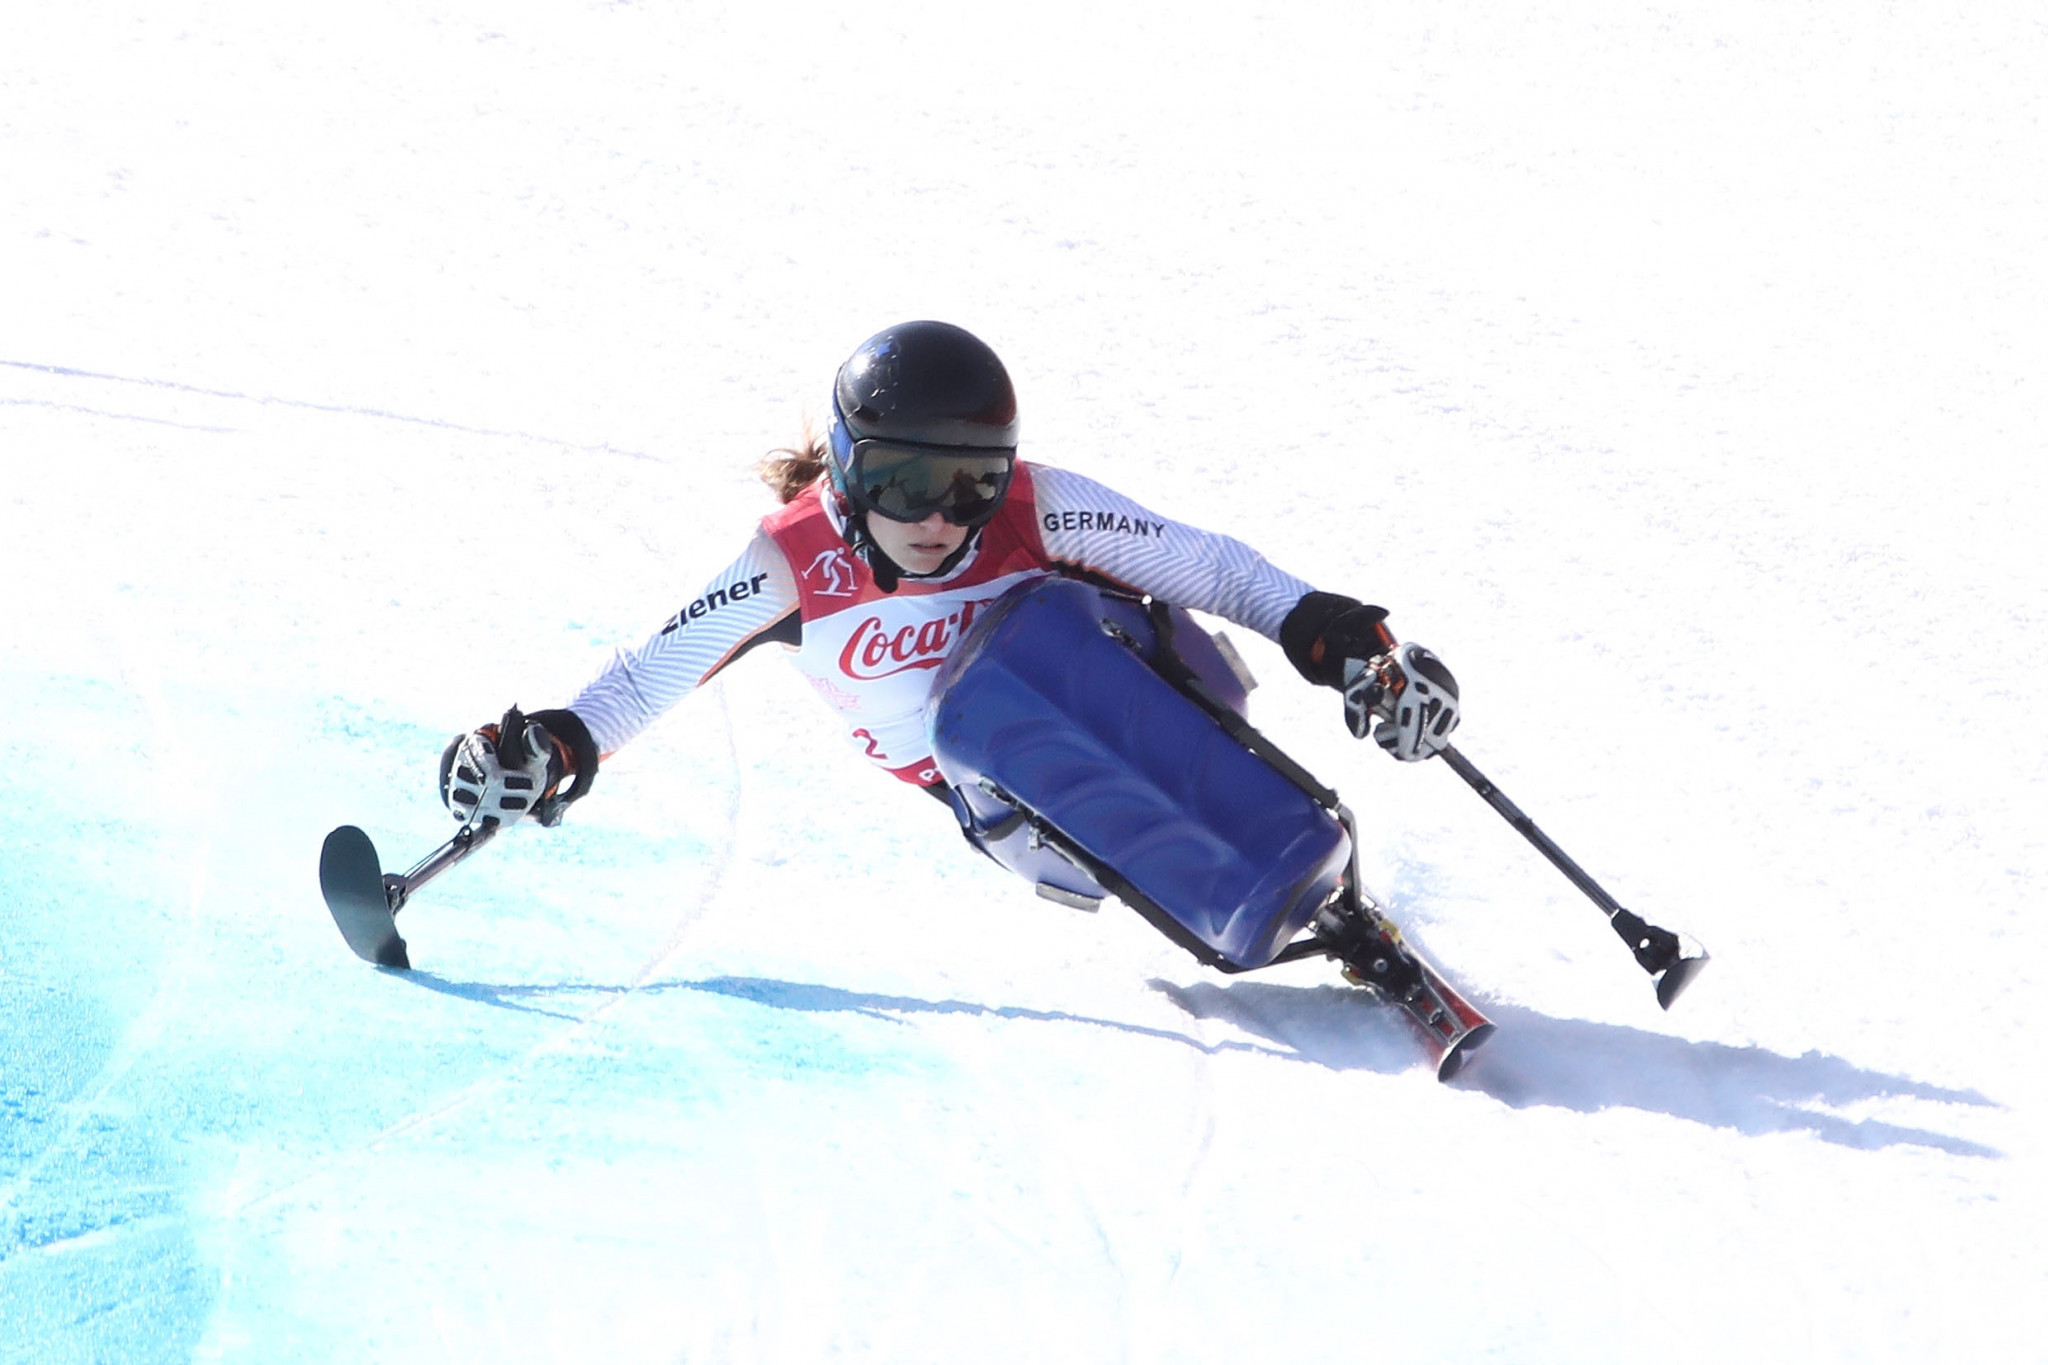 Seven-time Paralympic champion expresses fears over Beijing 2022 snow